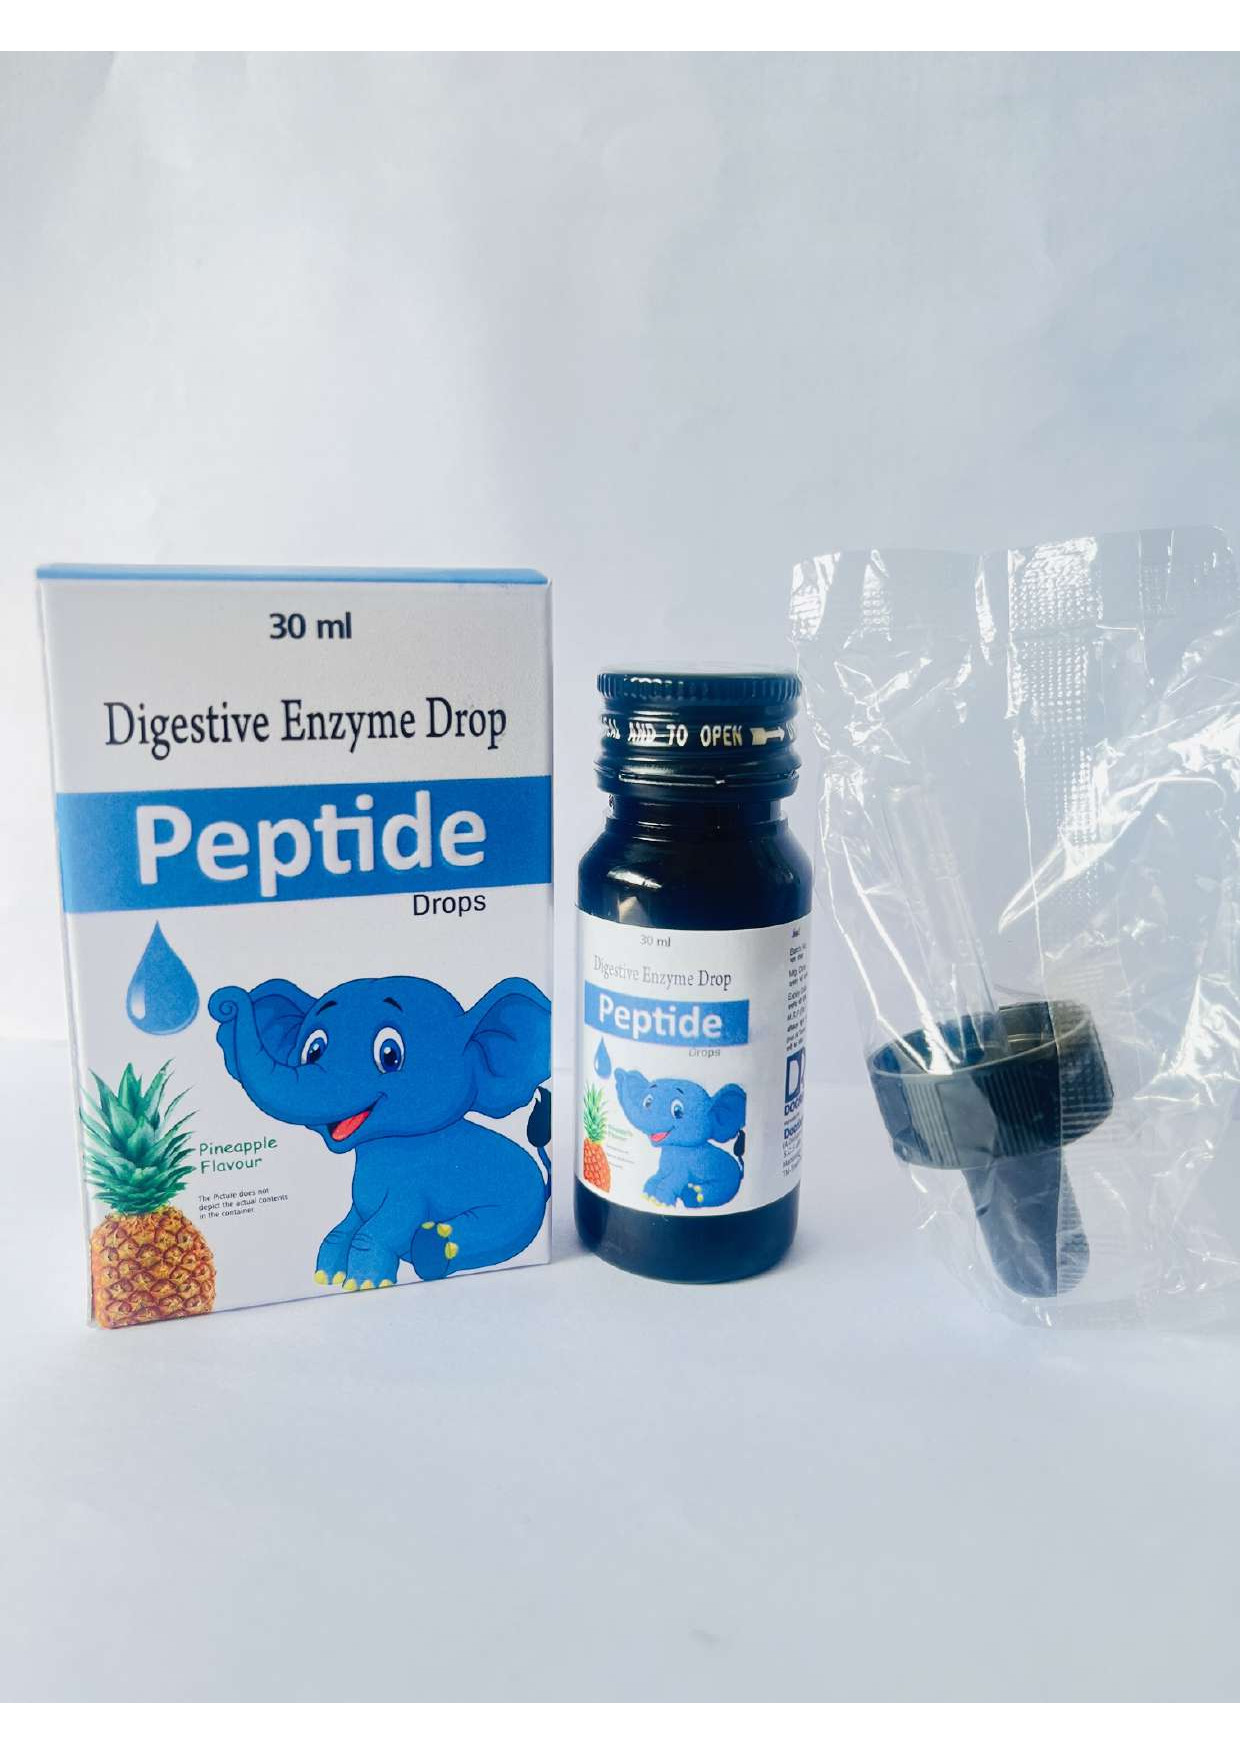 Product Name: Peptide, Compositions of Peptide are Digestive Enzyme Drop - Docrix Healthcare